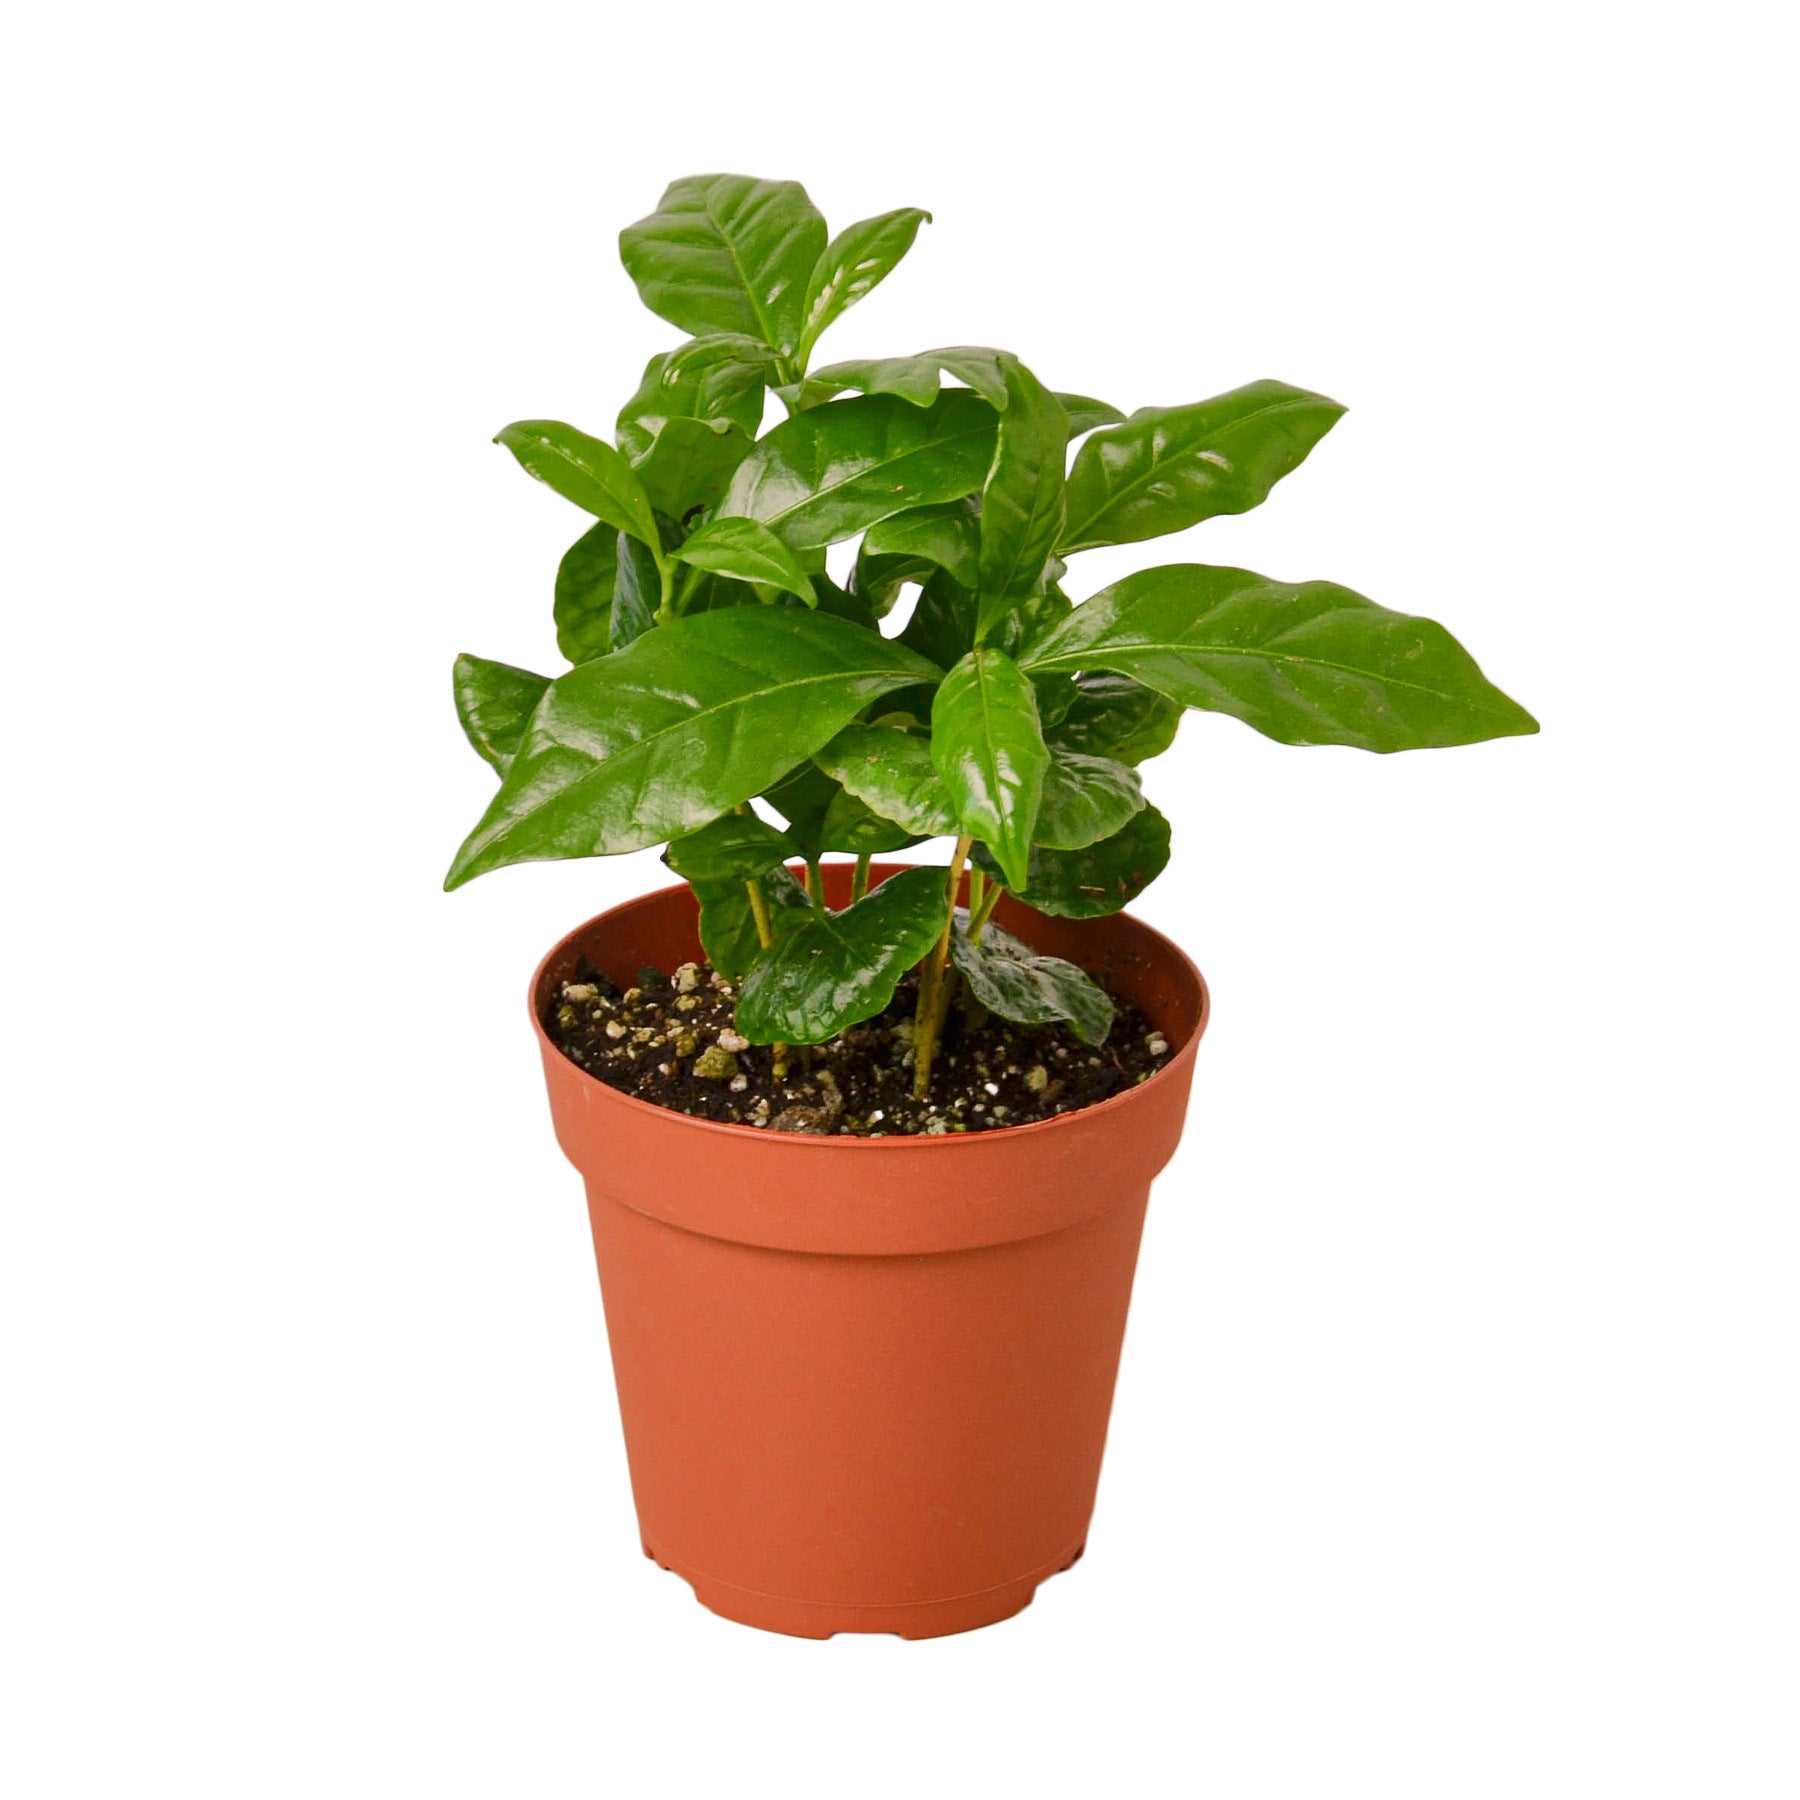 A coffee plant in a pot on a white background, available at the best garden nursery near me.